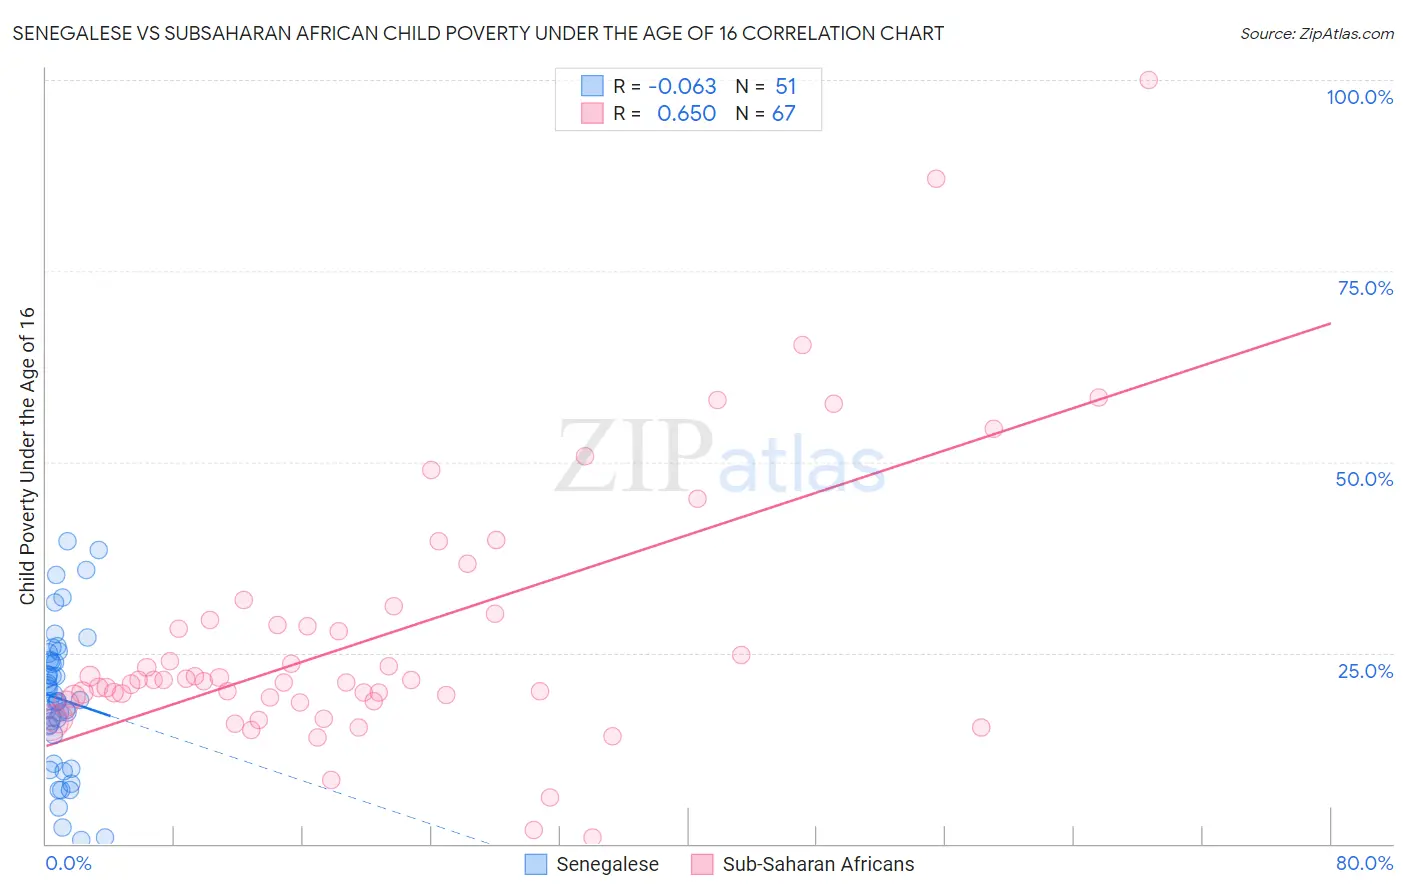 Senegalese vs Subsaharan African Child Poverty Under the Age of 16